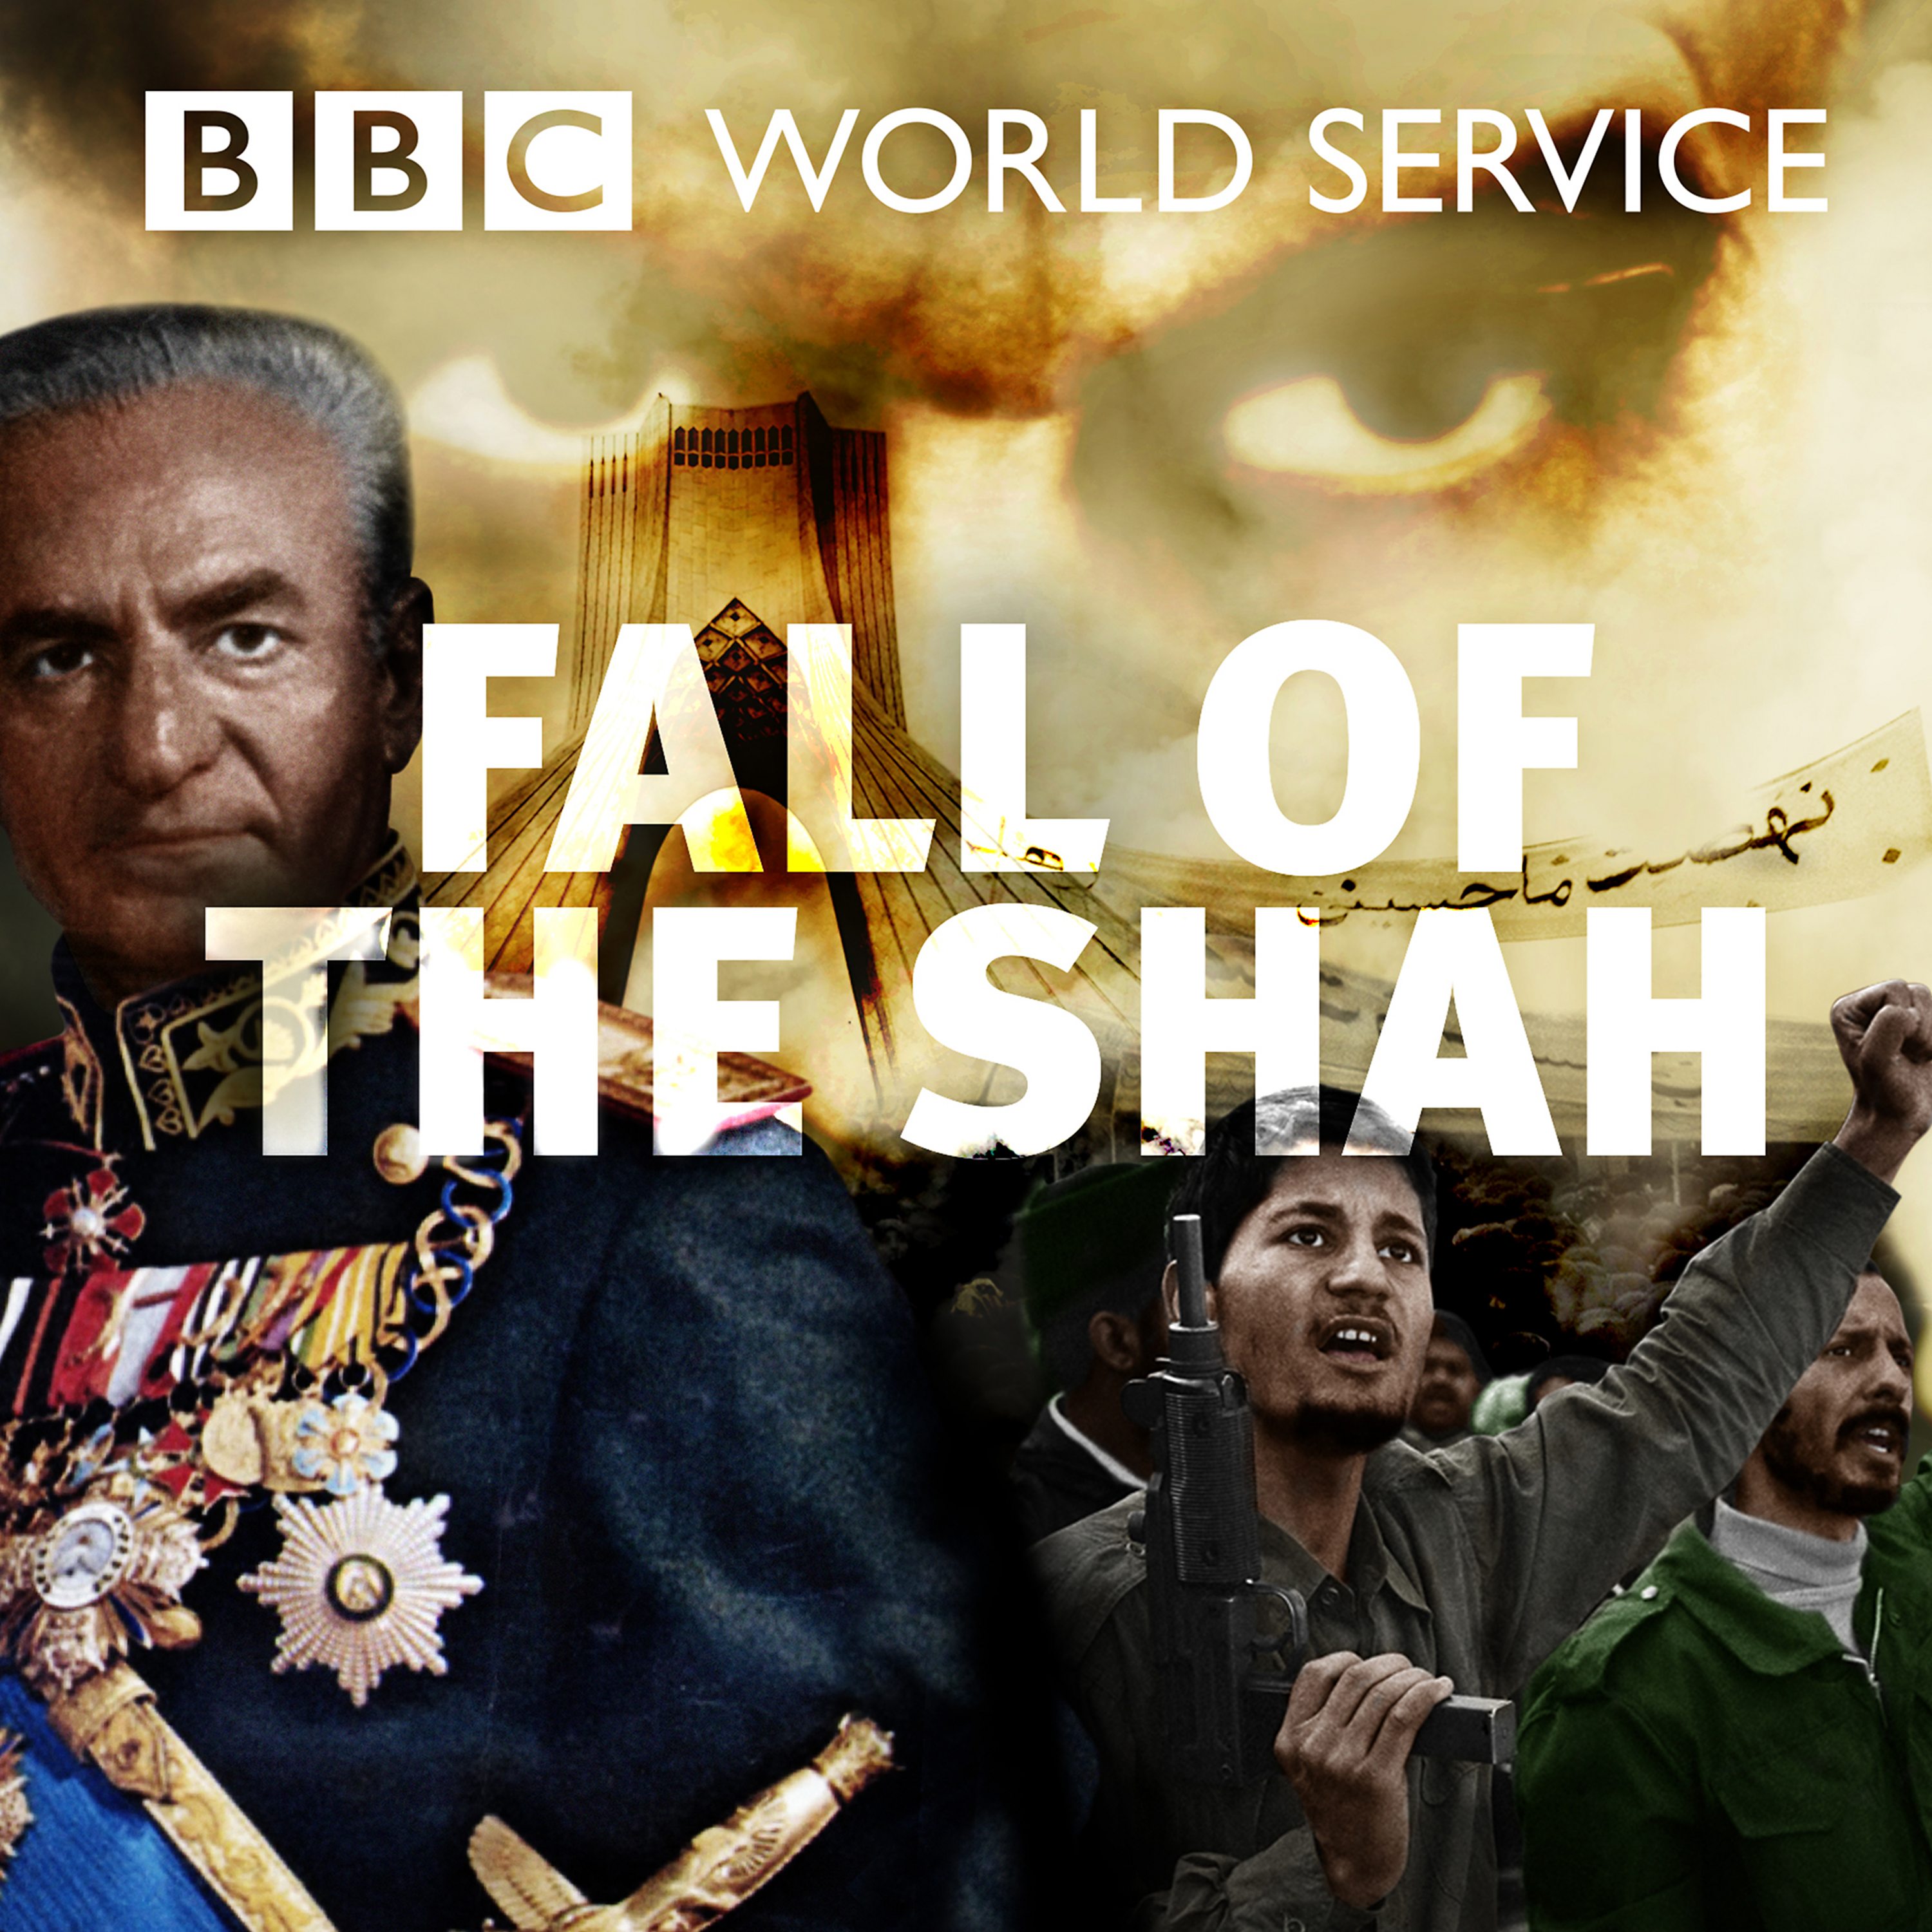 Fall of the Shah